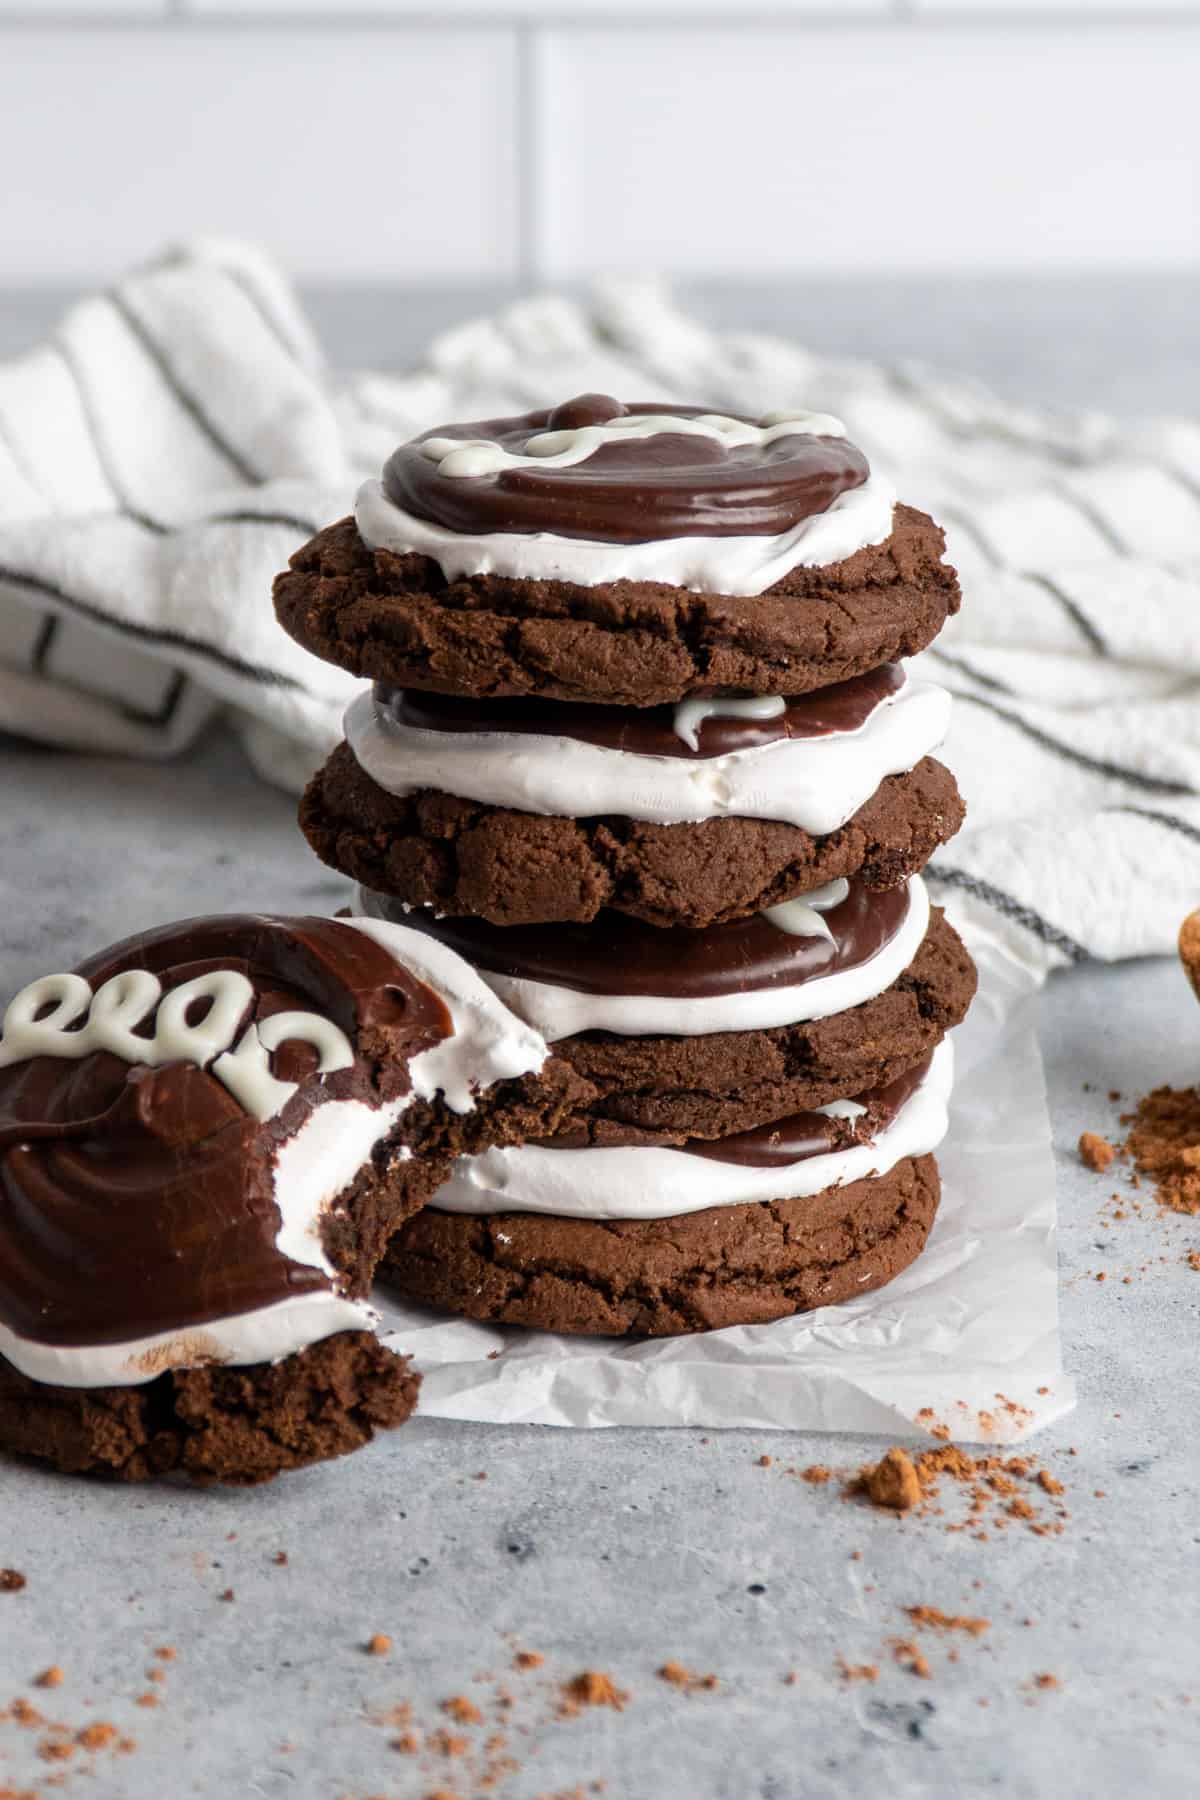 Chocolate and marshmallow cookies stacked on top of each other.